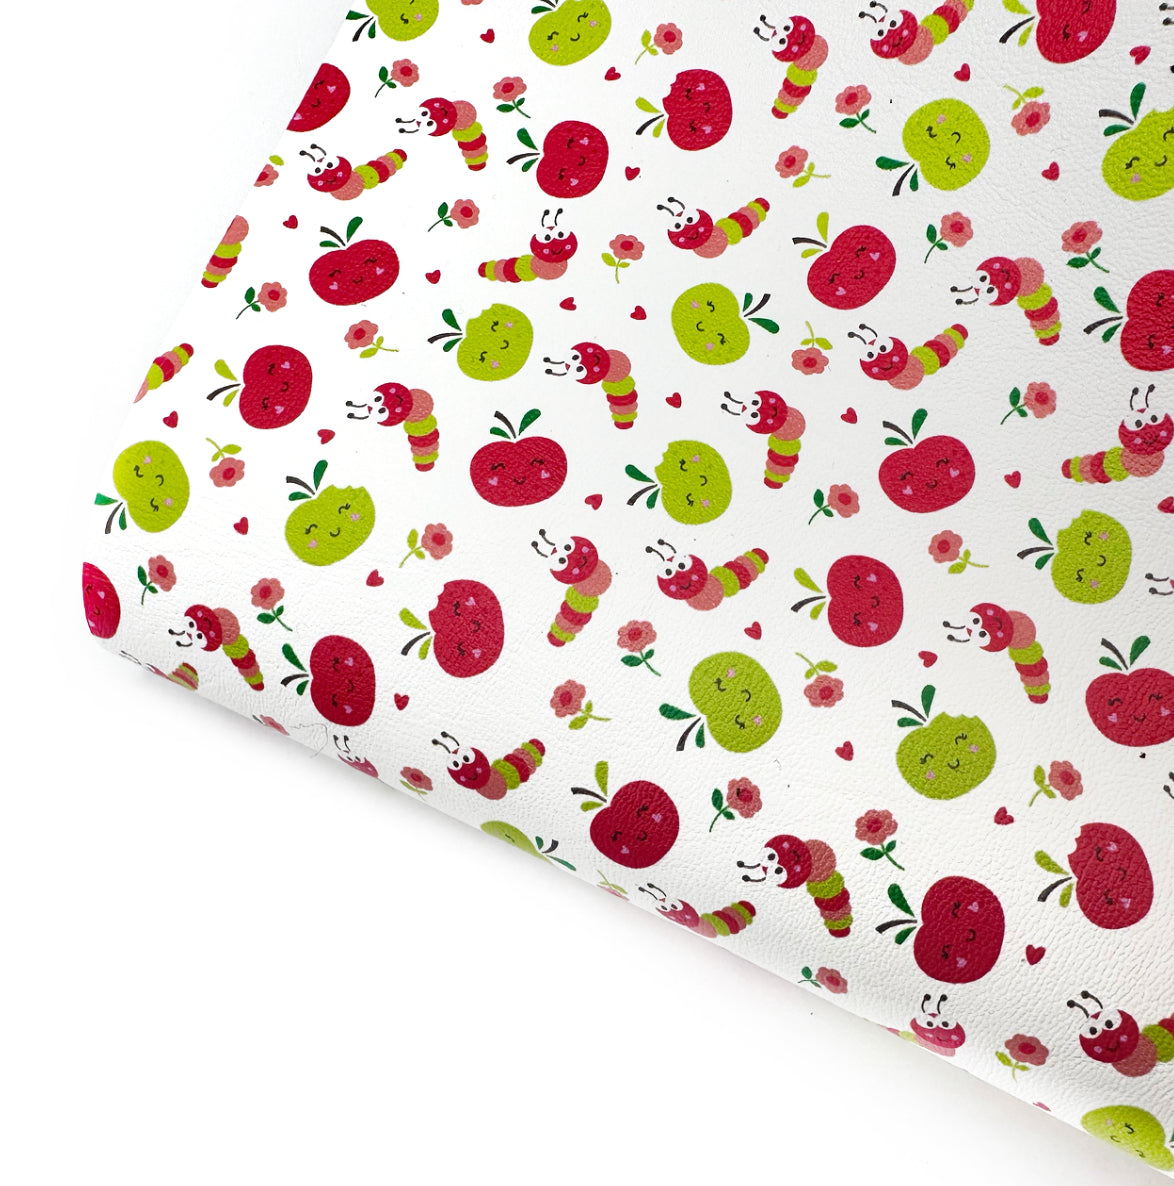 Apples & Caterpillars Premium Faux Leather Fabric Sheets